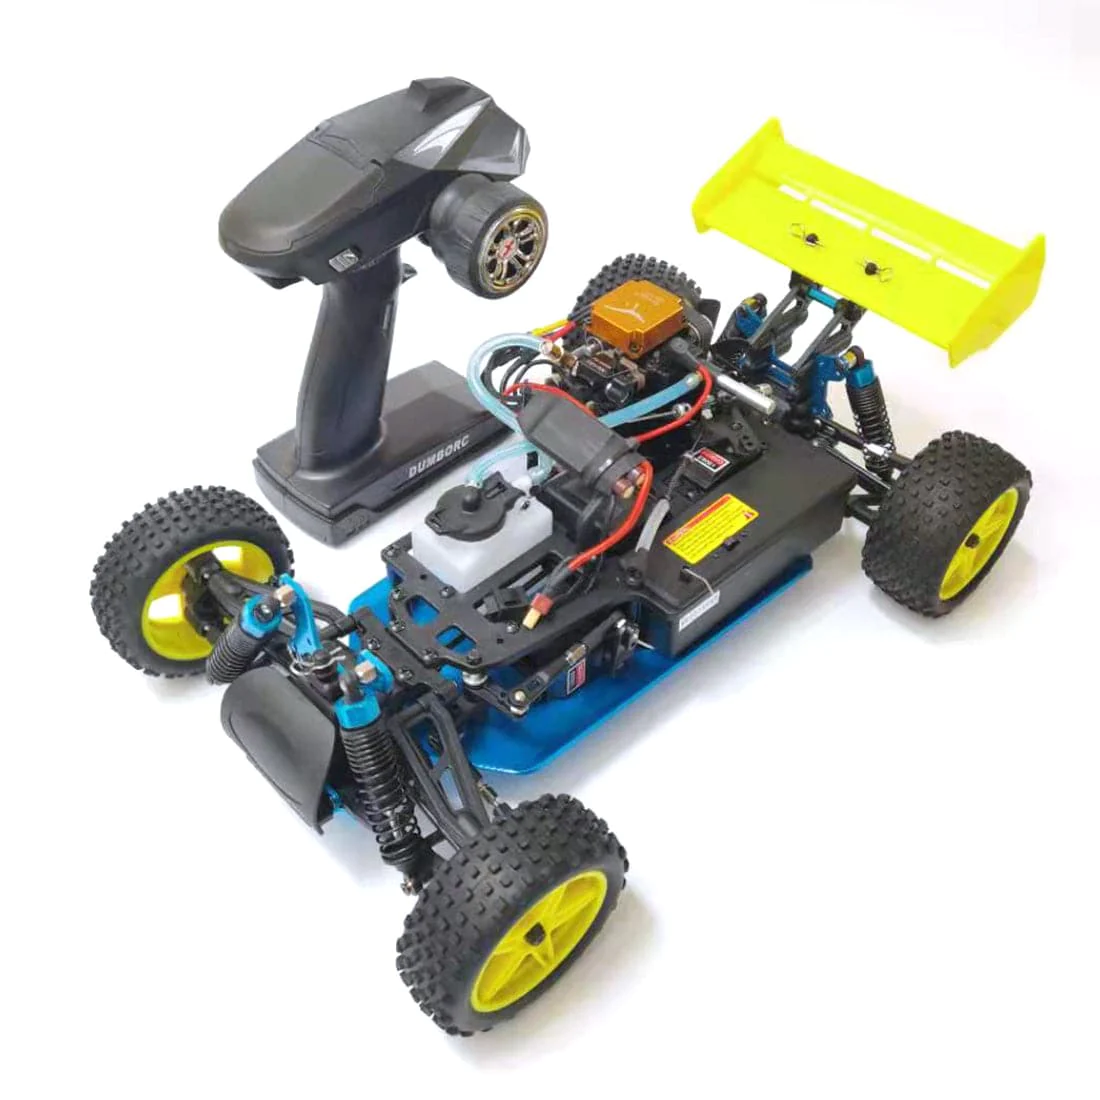 HSP 1/10 2.4G 4WD Nitro Powered Off-road RC Vehicle for TOYAN FS-S100A Nitro Engine RTR 1